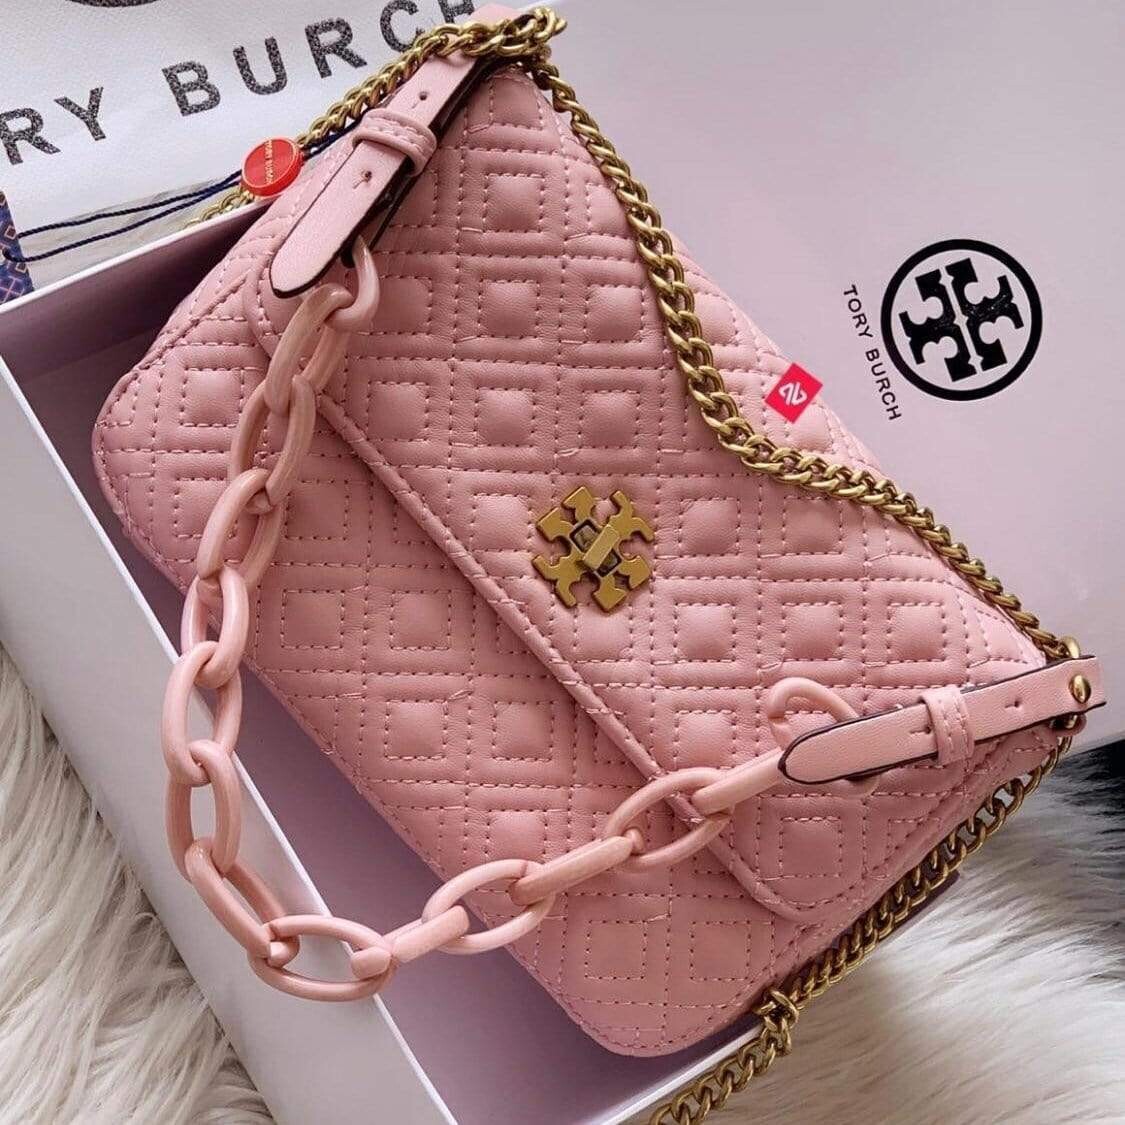 Tory Burch Quilted Pink Sling Bag